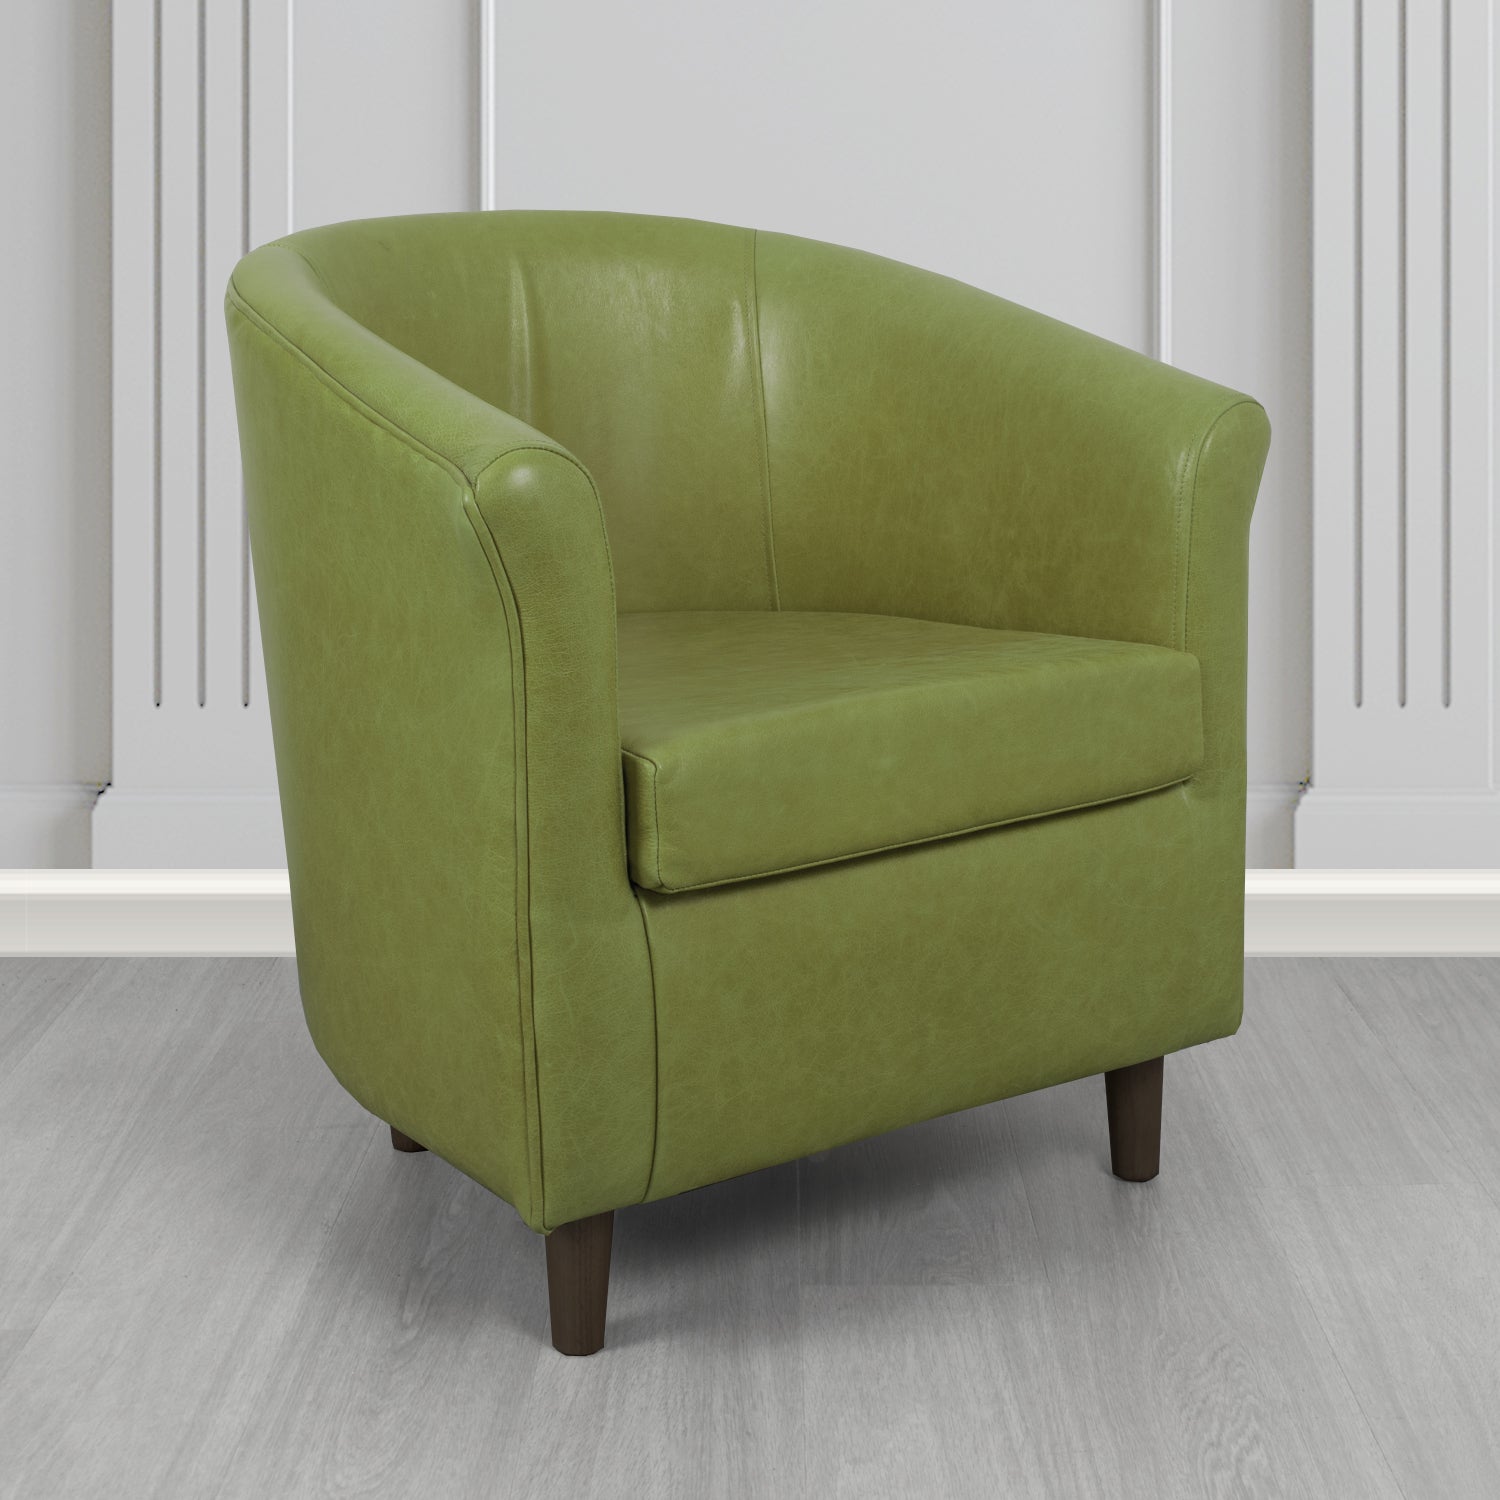 Tuscany Tub Chair in Crib 5 Old English Olive Genuine Leather - The Tub Chair Shop